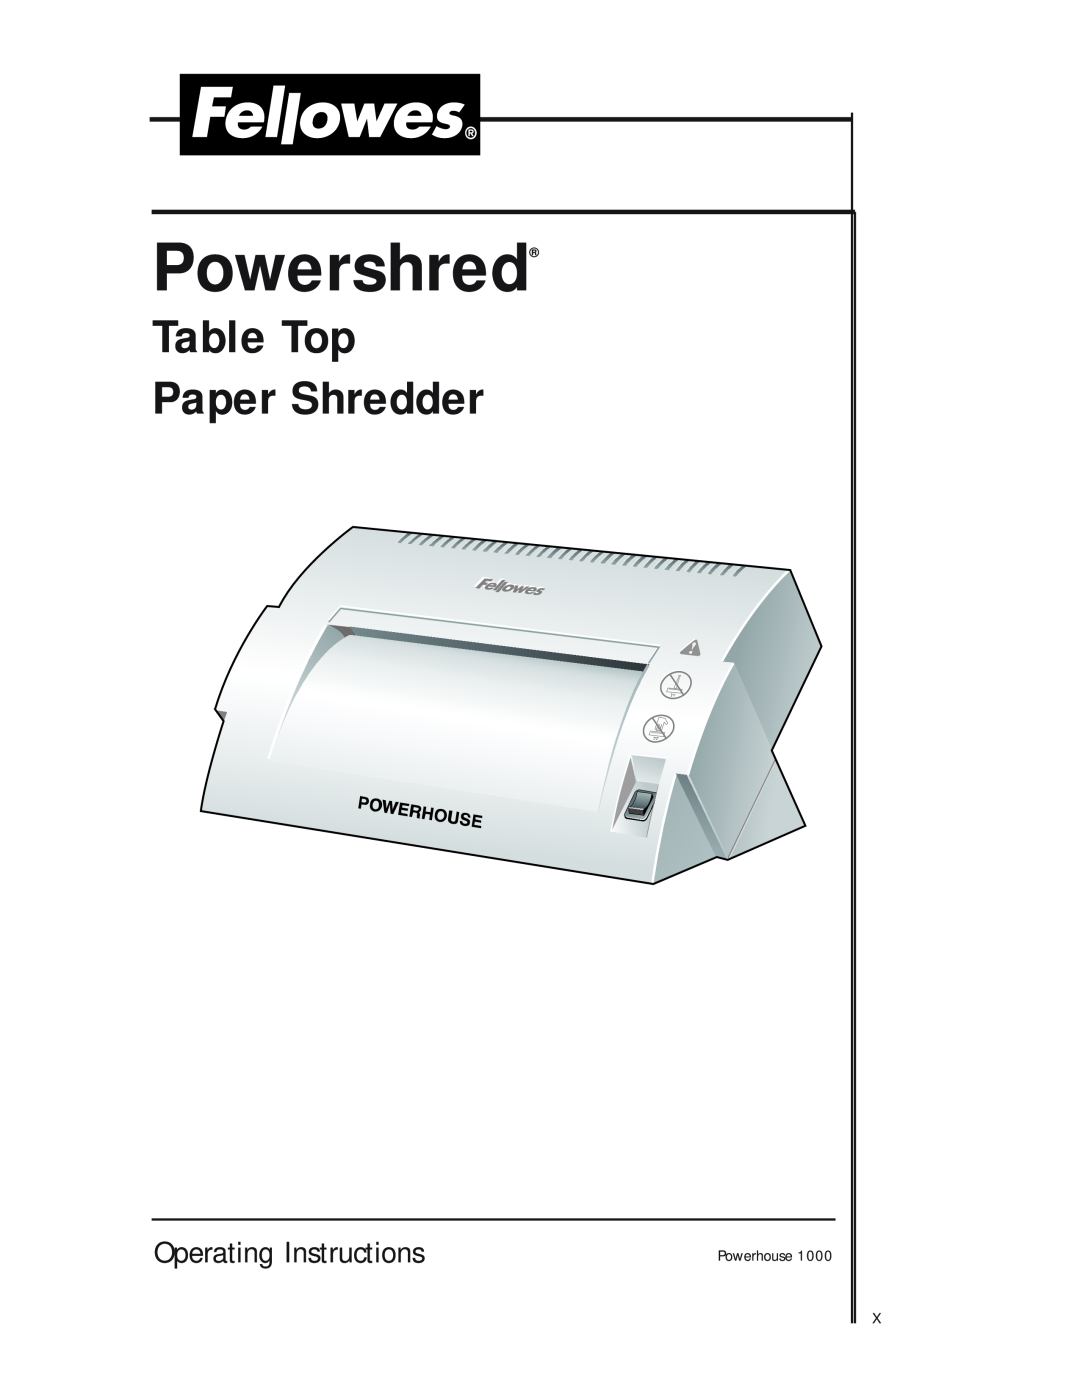 Fellowes S40C manual Powerhouse, Powershred, Table Top, Paper Shredder, Operating Instructions 